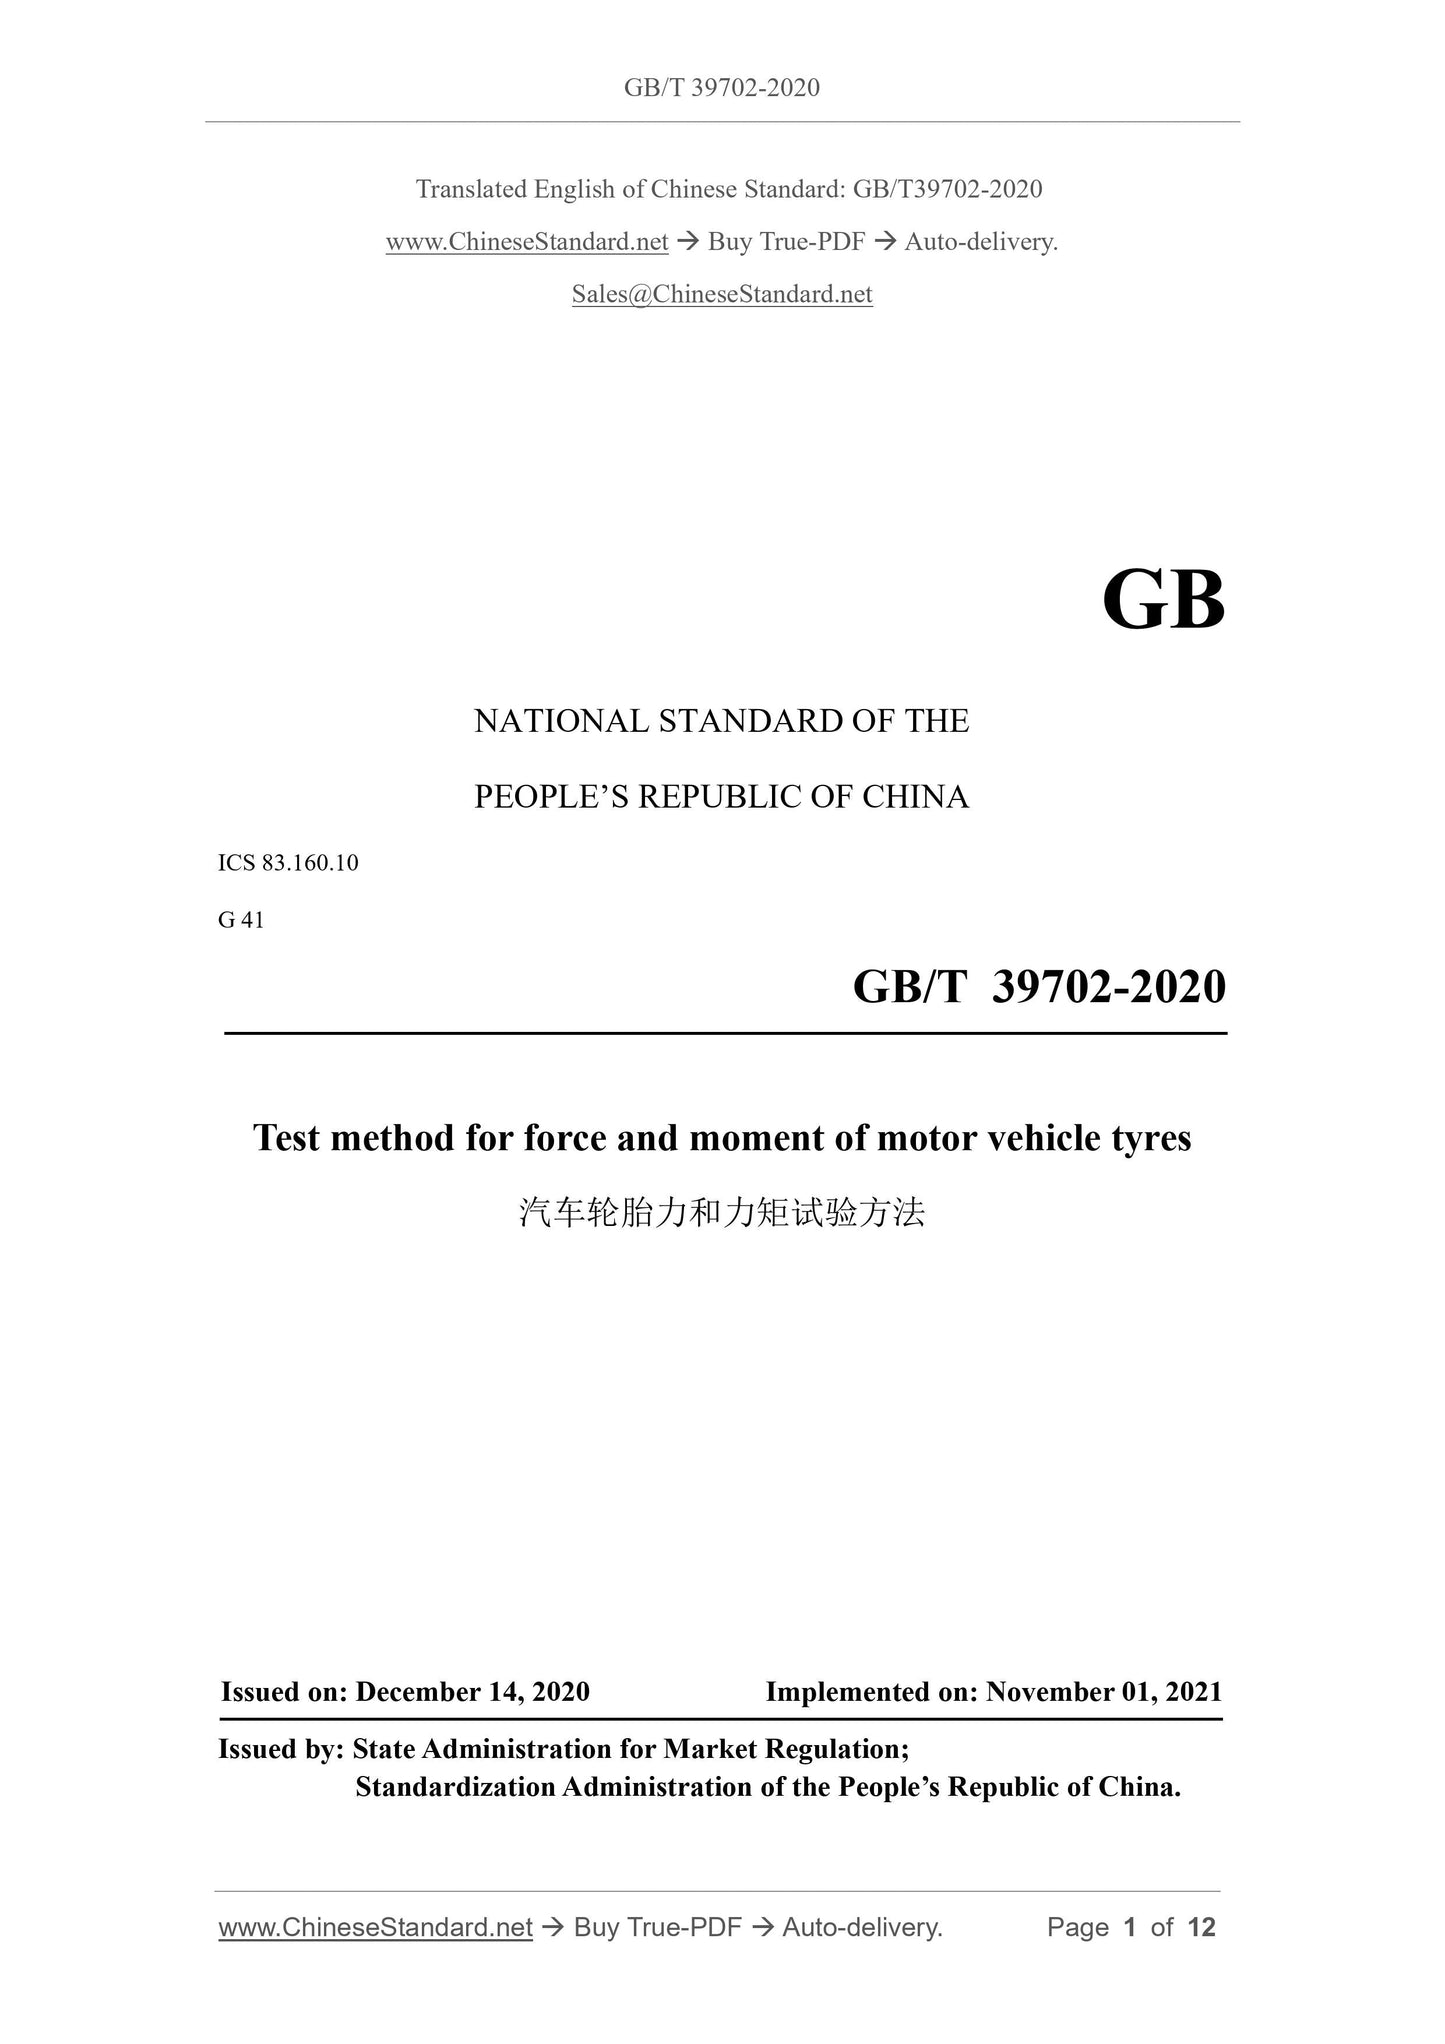 GB/T 39702-2020 Page 1